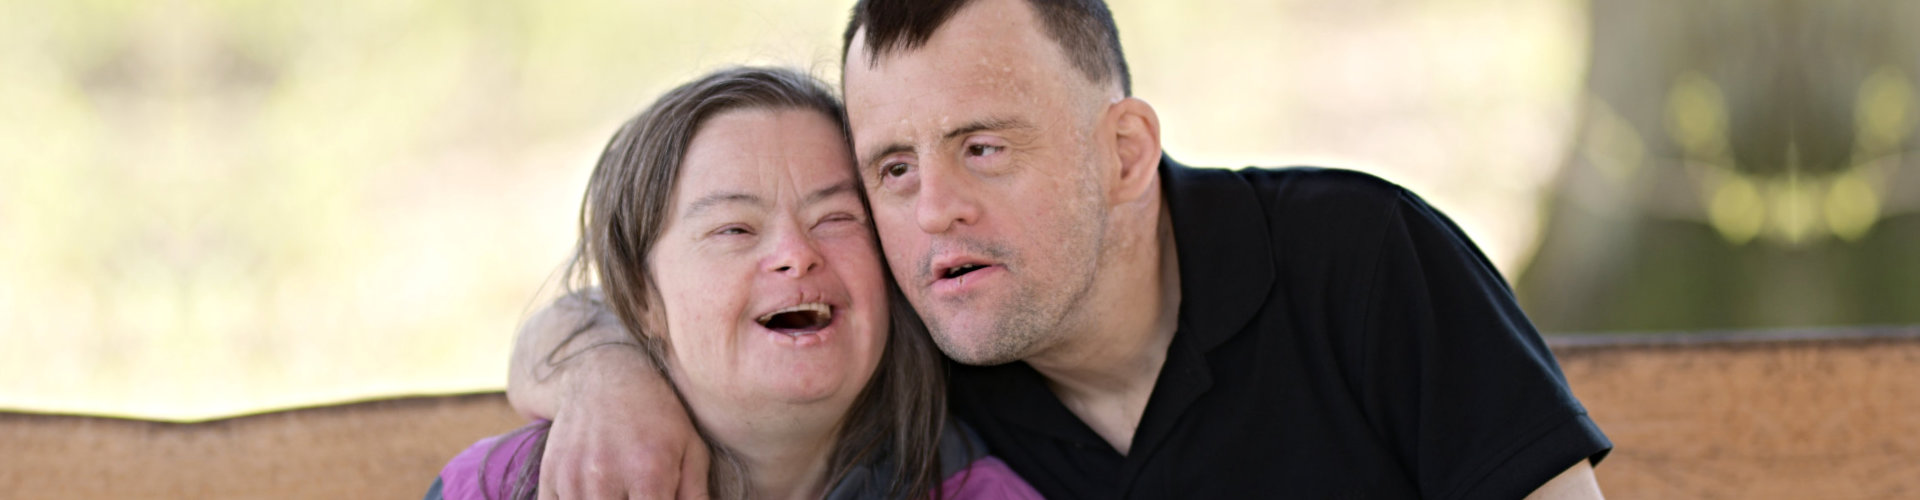 couple with down syndrome smiling